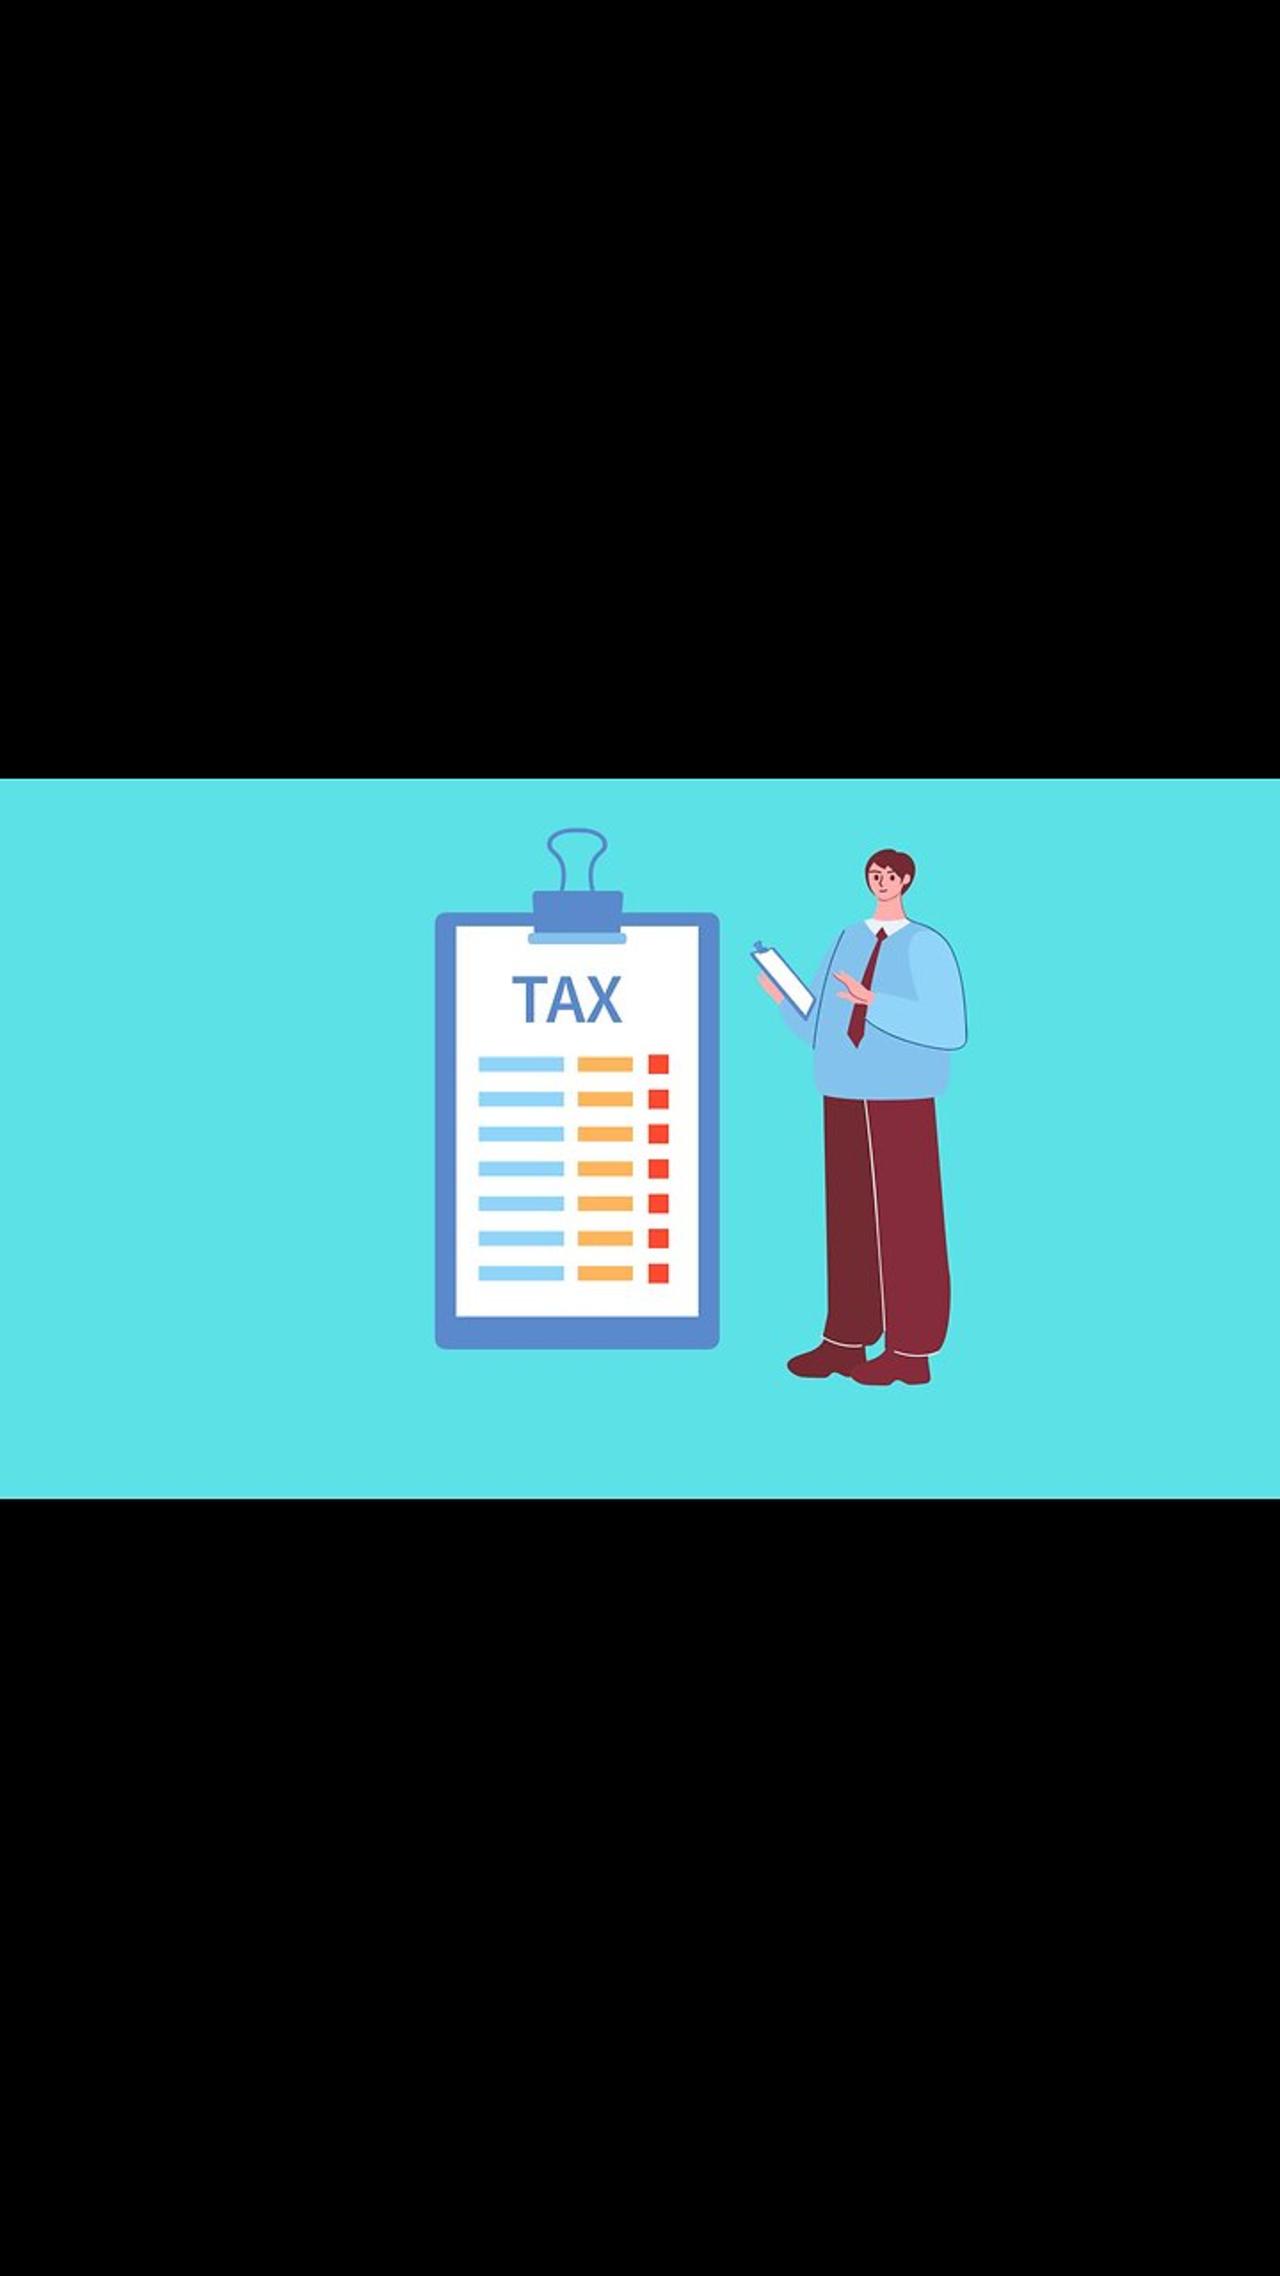 How to Overcome Tax Issues When Selling on Ecommerce